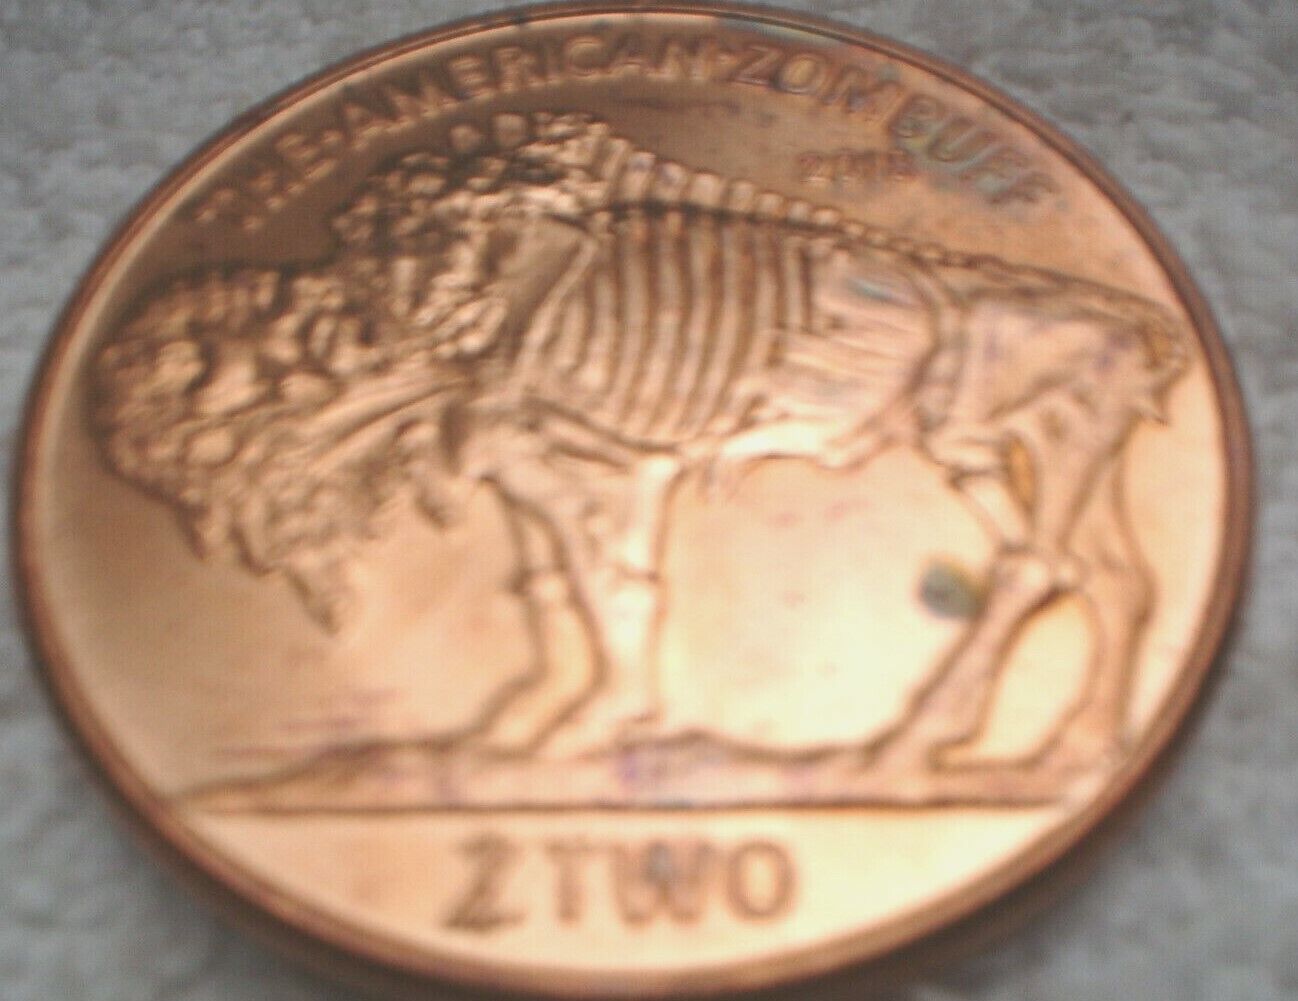 1 x ONE OUNCE COPPER PLATED TOKEN ZOMBUCKS CURRENCY OF THE APOCALYPSE ZOMBUFF